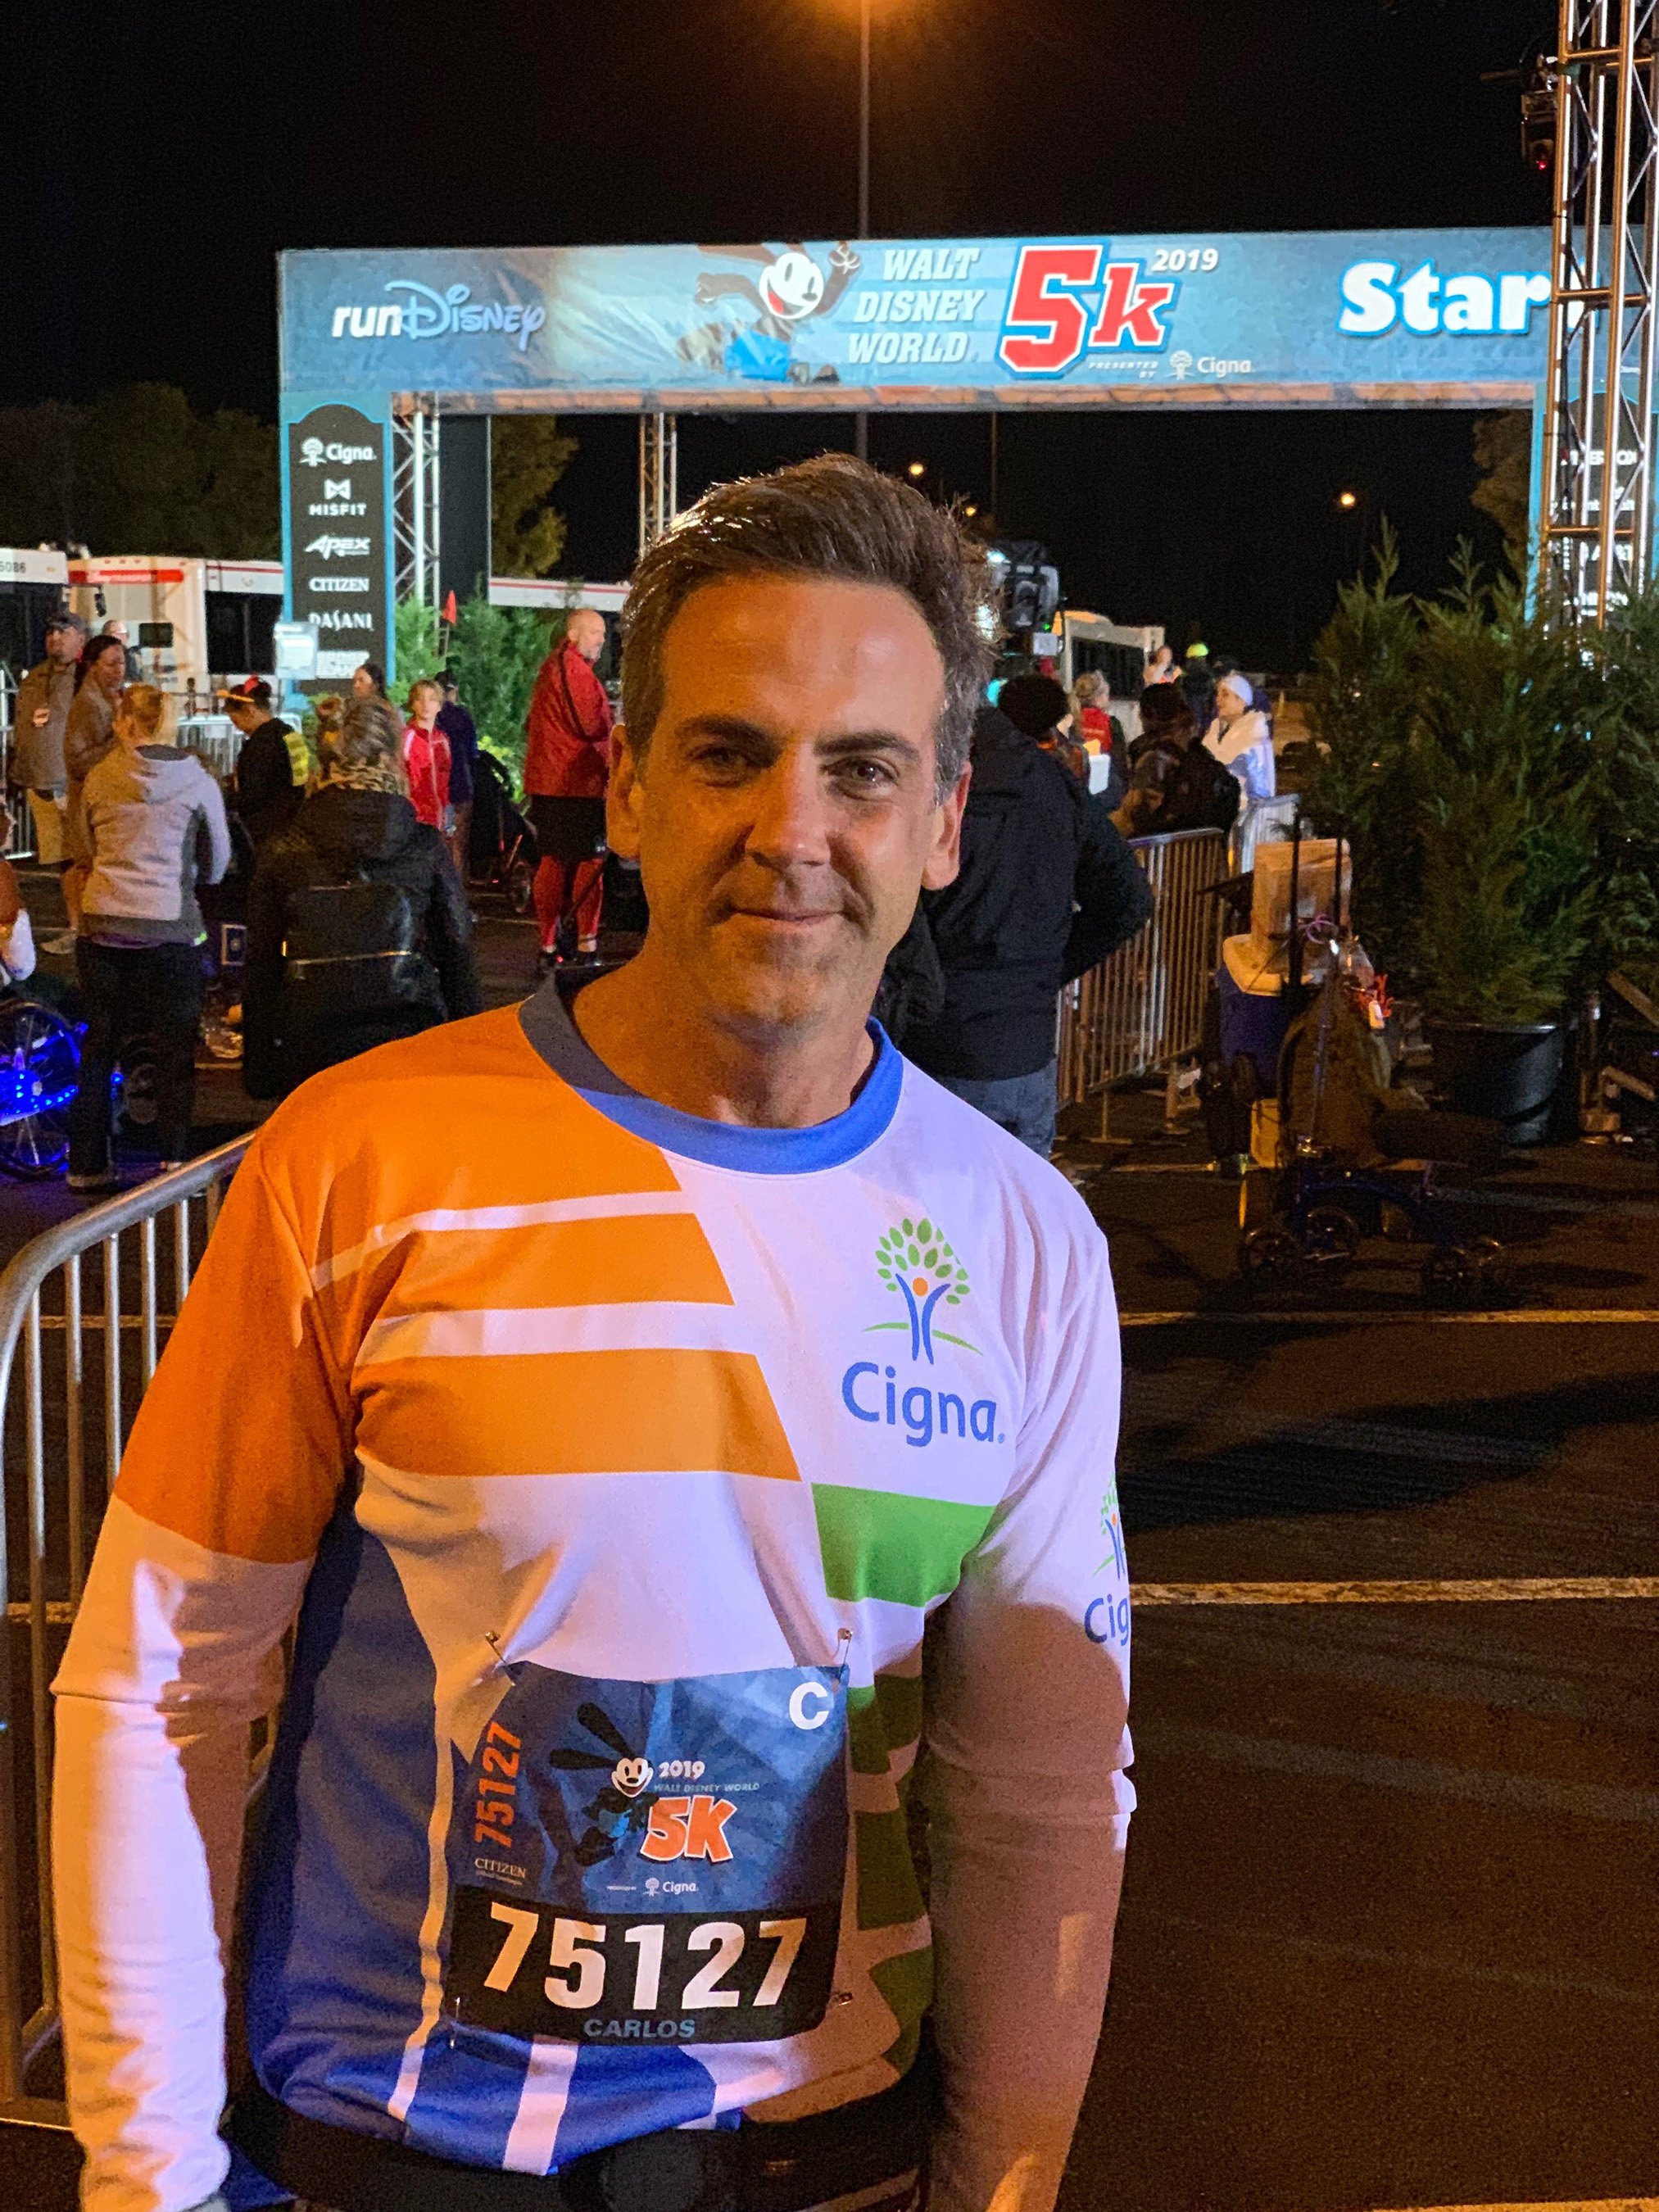 Actor Carlos Ponce joins Cigna at the 2019 Walt Disney World® 5K to encourage Latinos to take control of their physical and emotional wellbeing